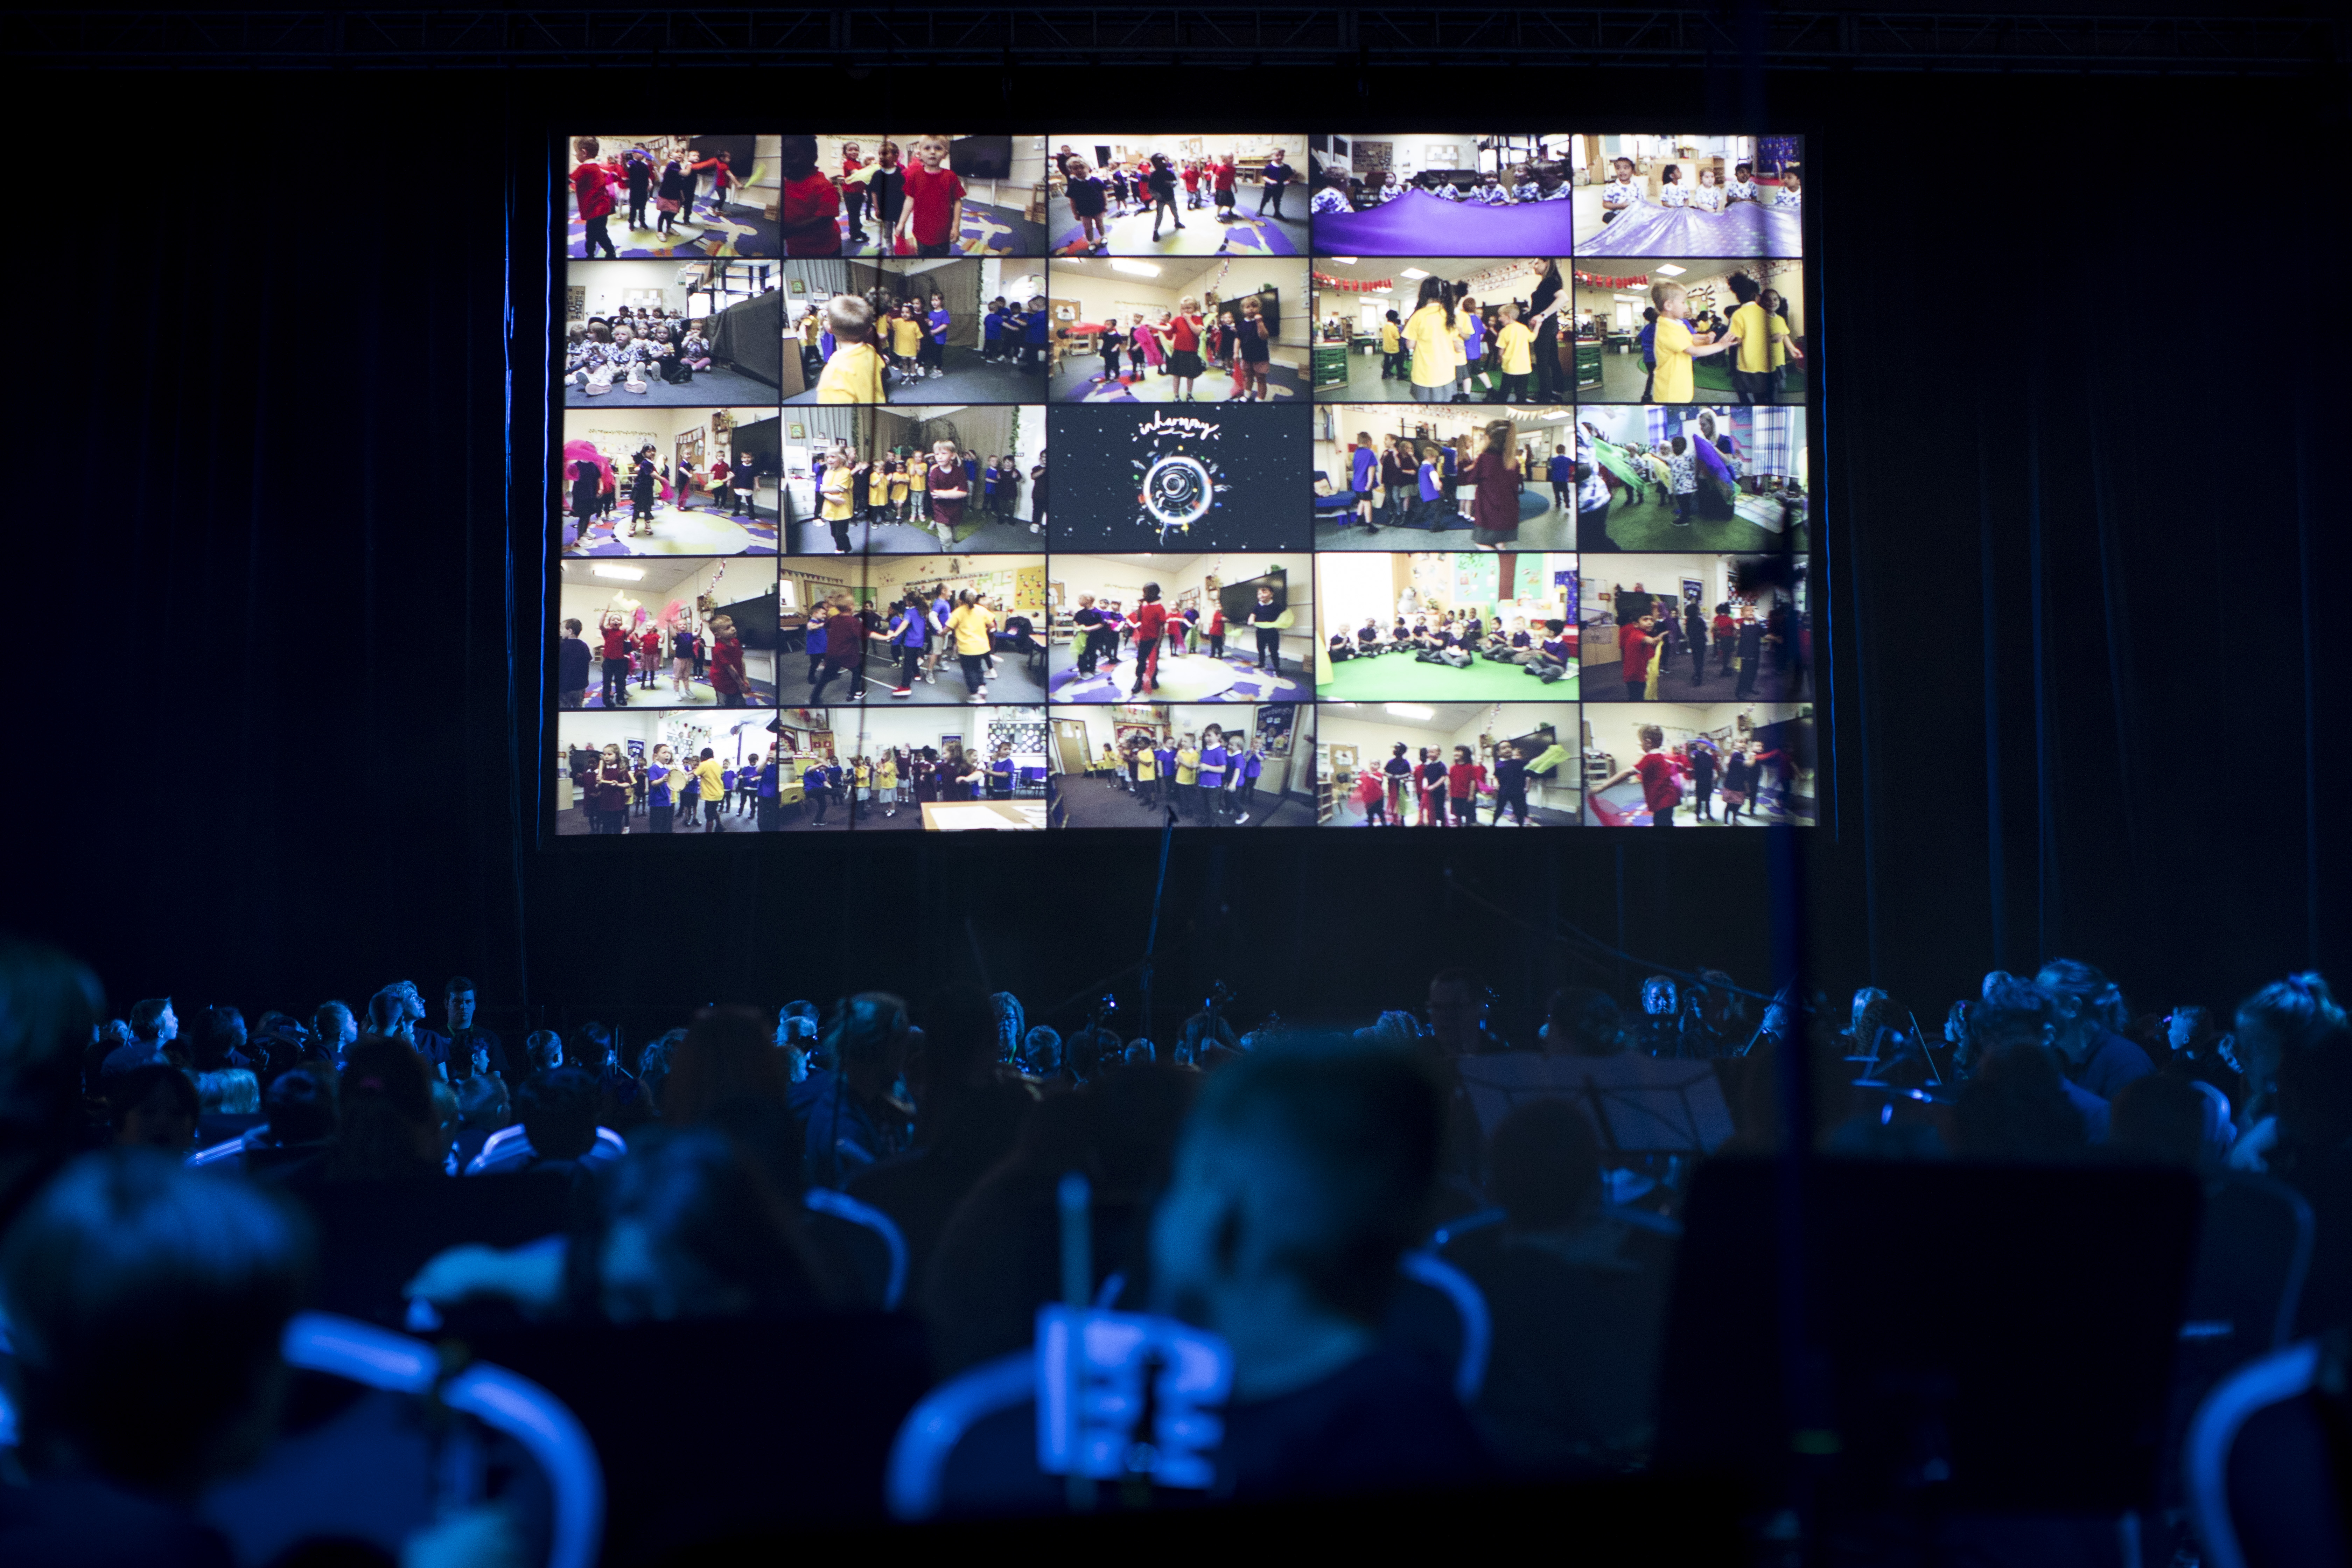 Picture showing part of the orchestra with a giant screen behind them showing a video of children from Early Years provision